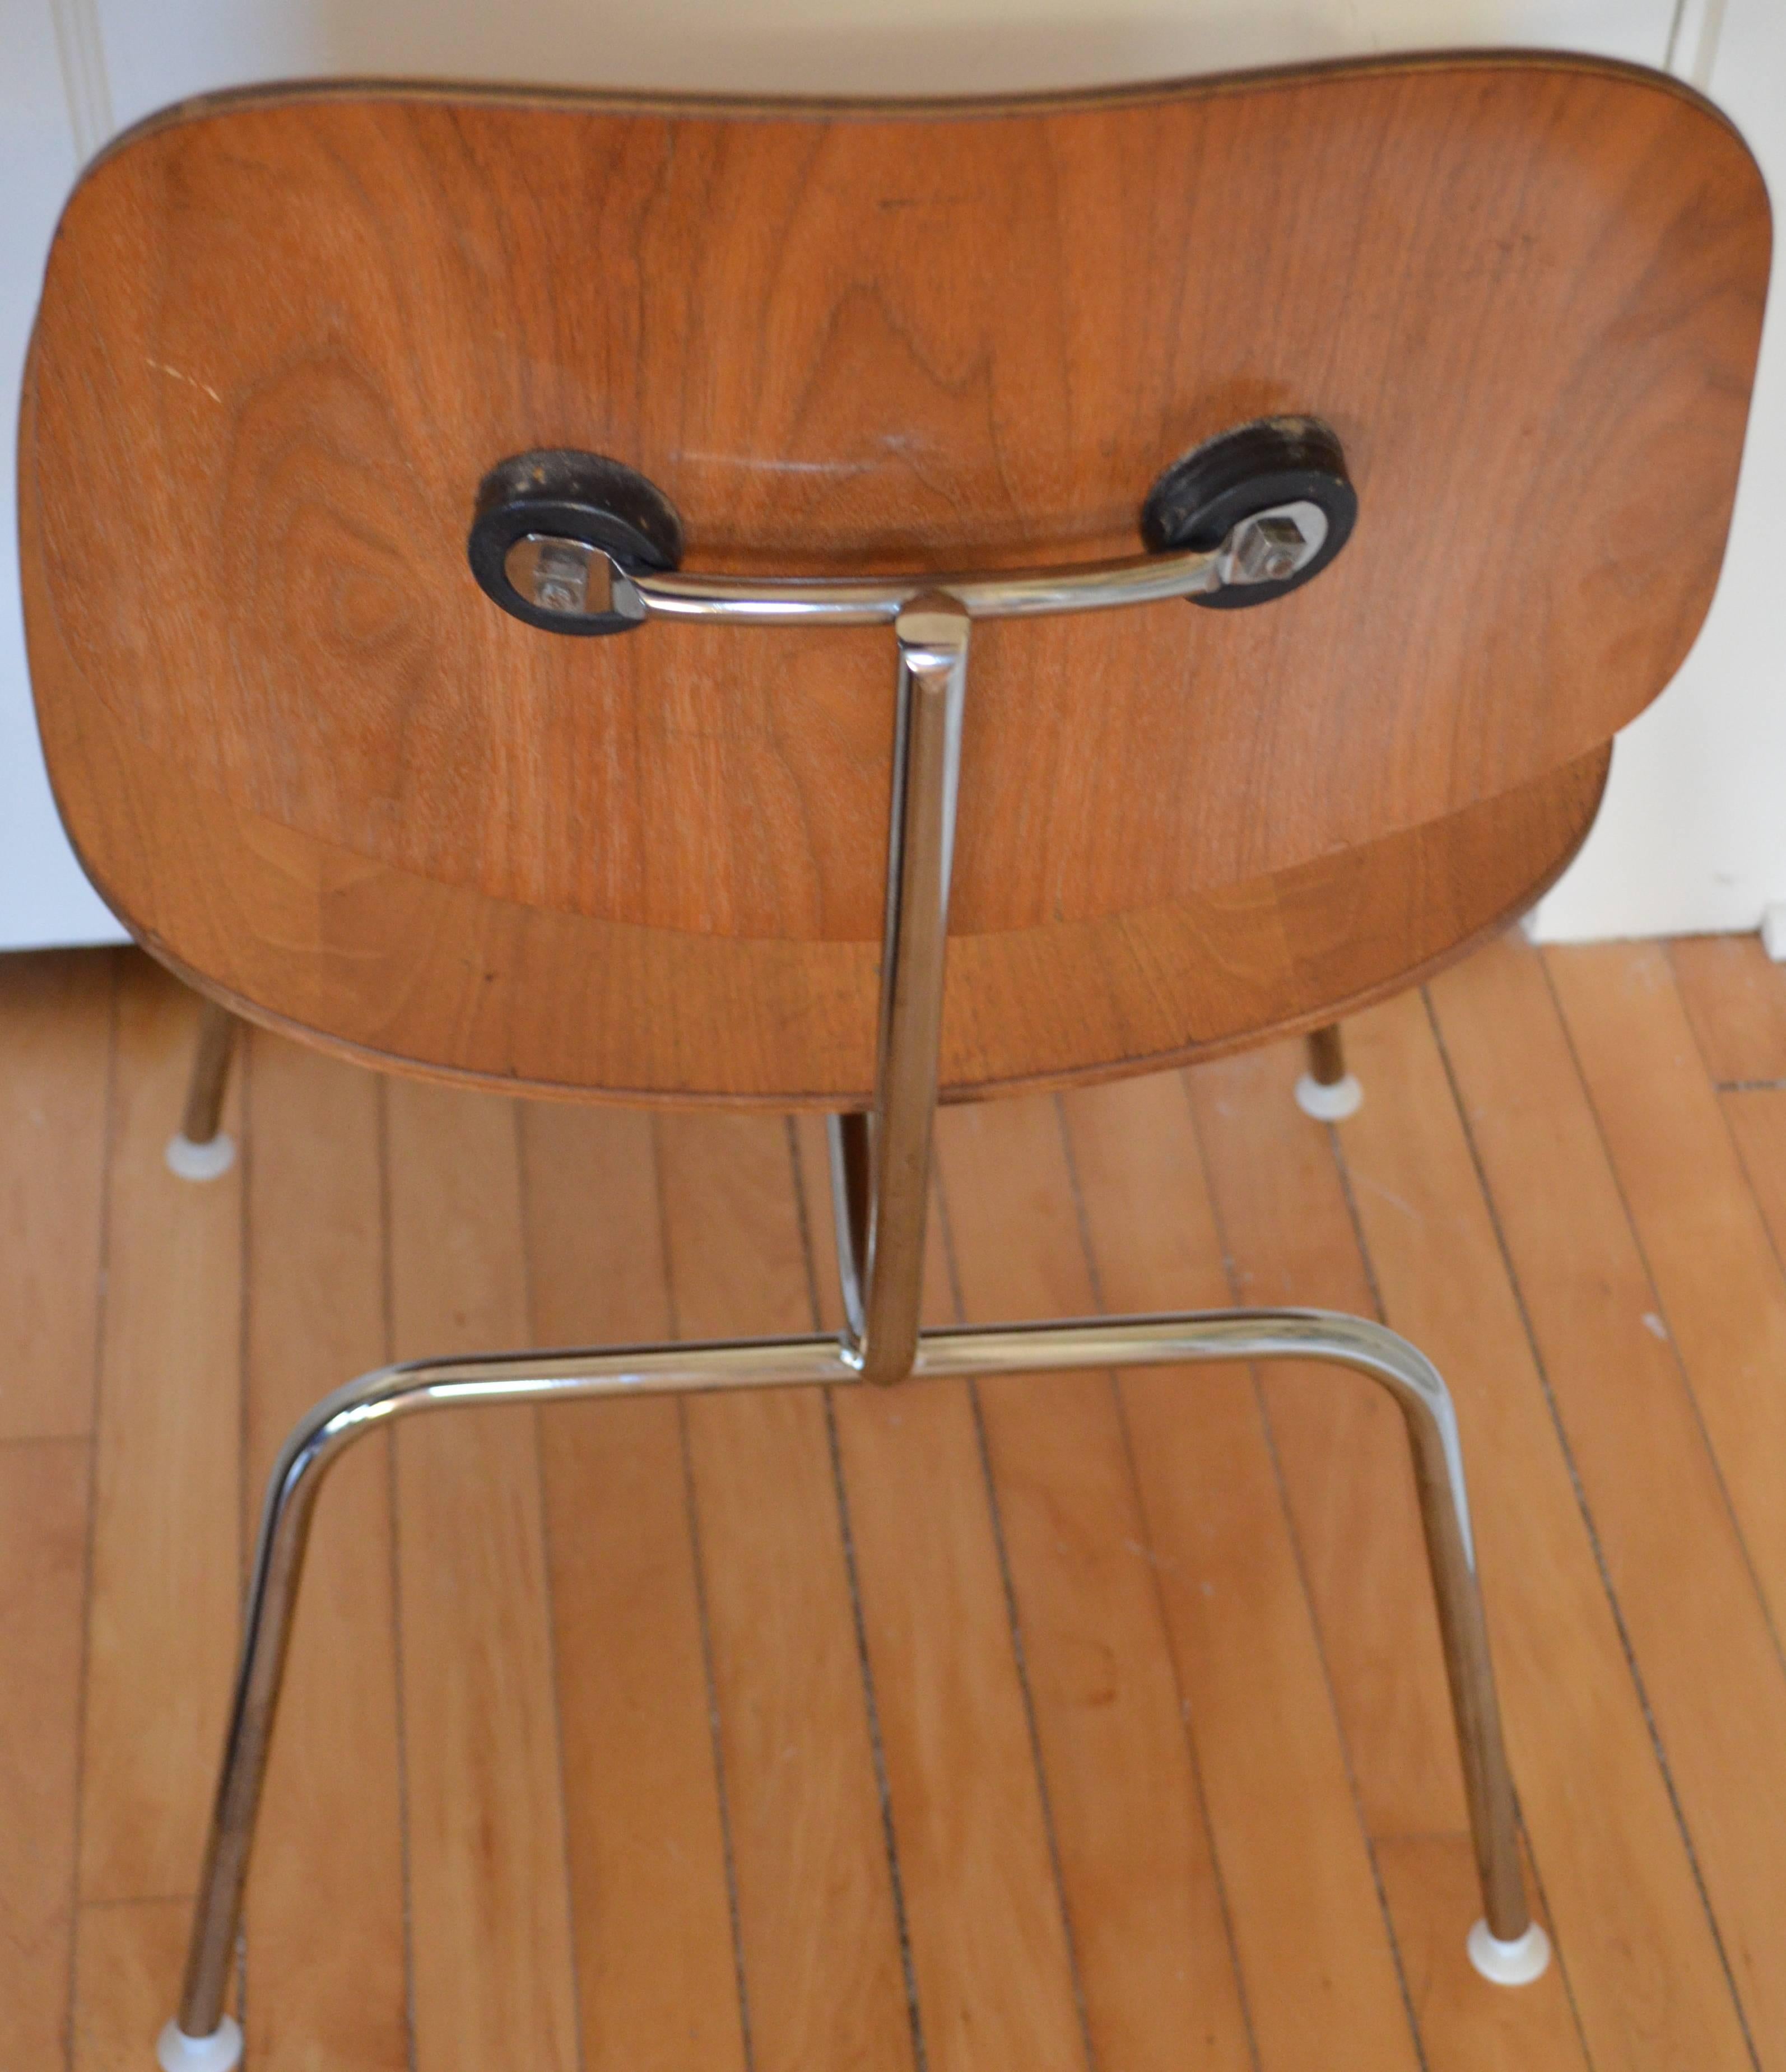 Stainless Steel Herman Miller 1950s Walnut Dining Room Chair Chairs w/new HM Frames; Qty avail